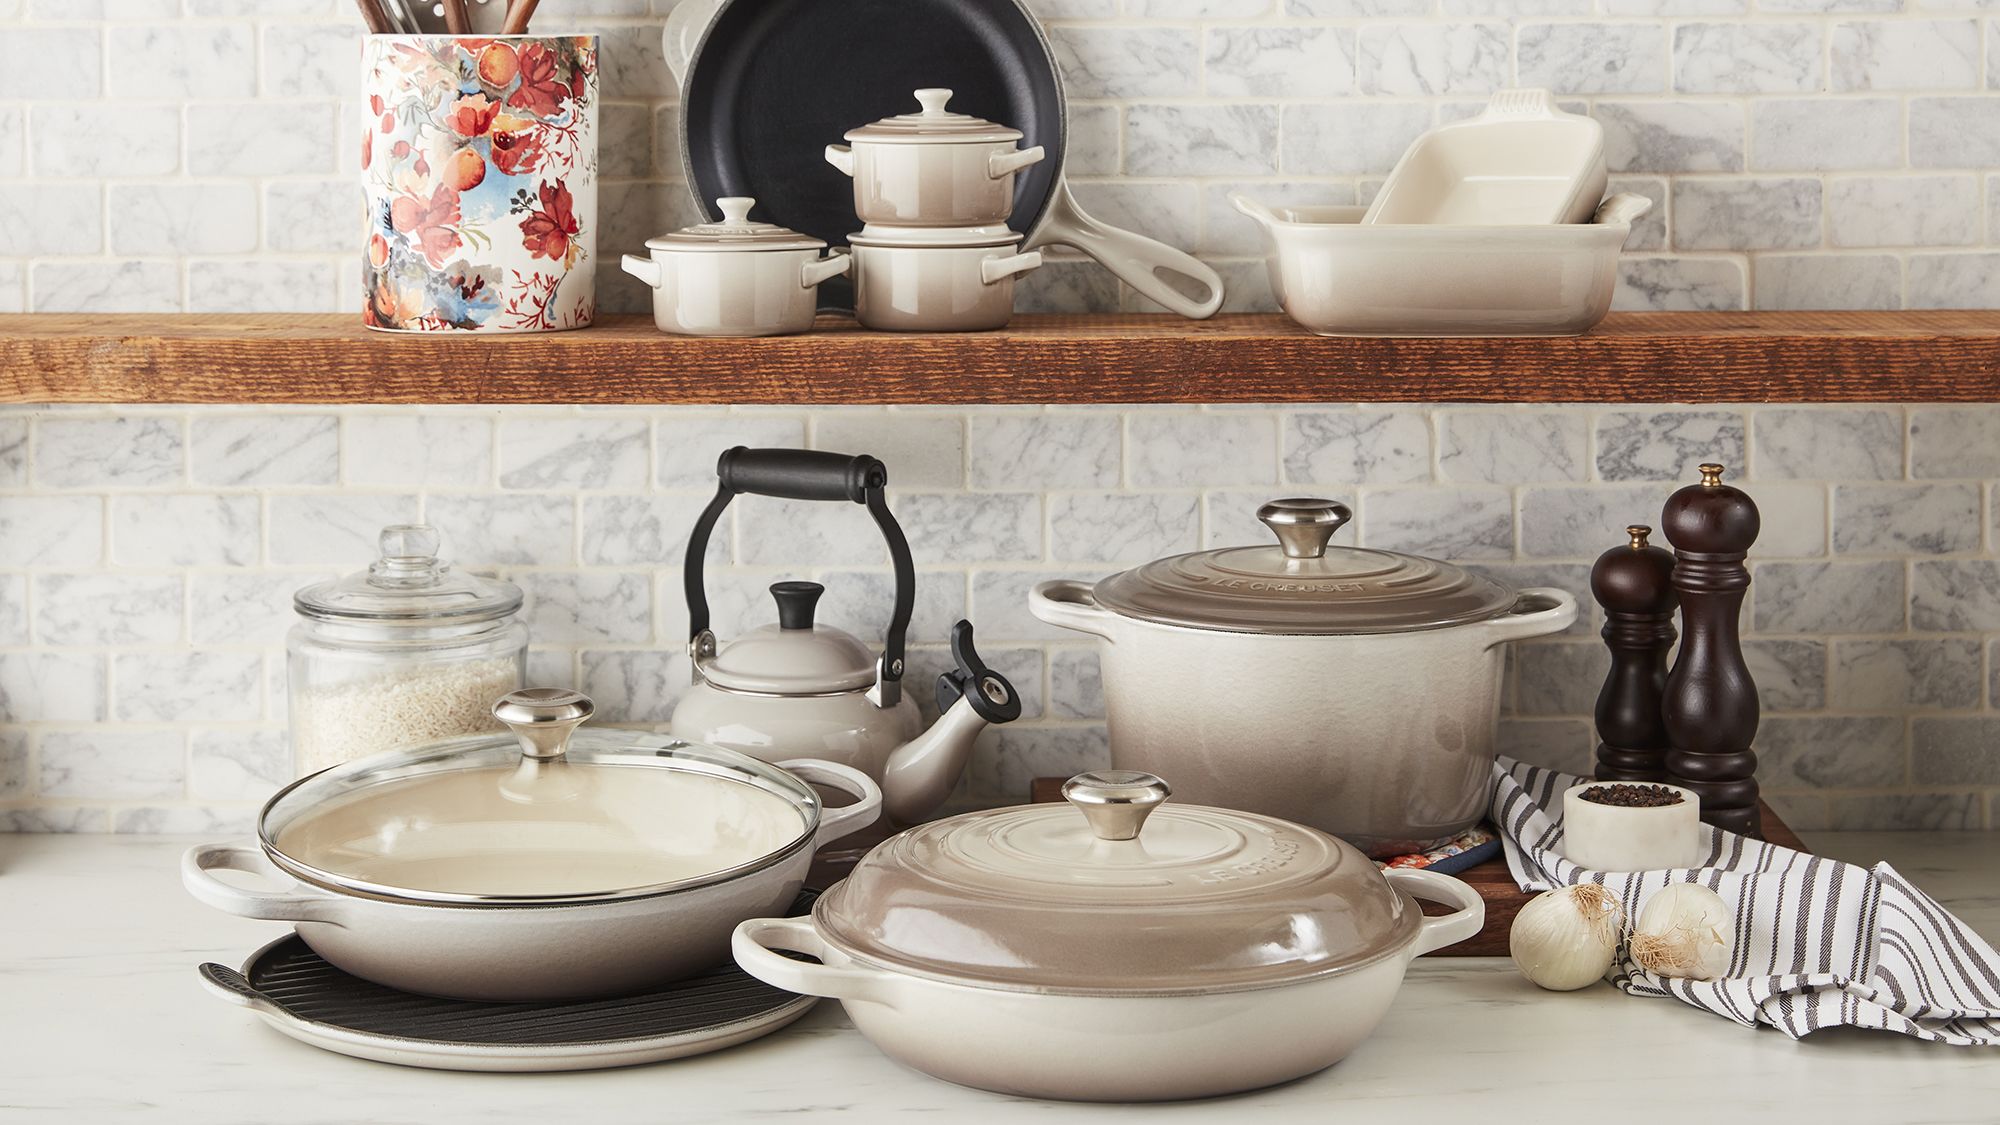 Prime Day 2022: The best deals on the popular Le Creuset